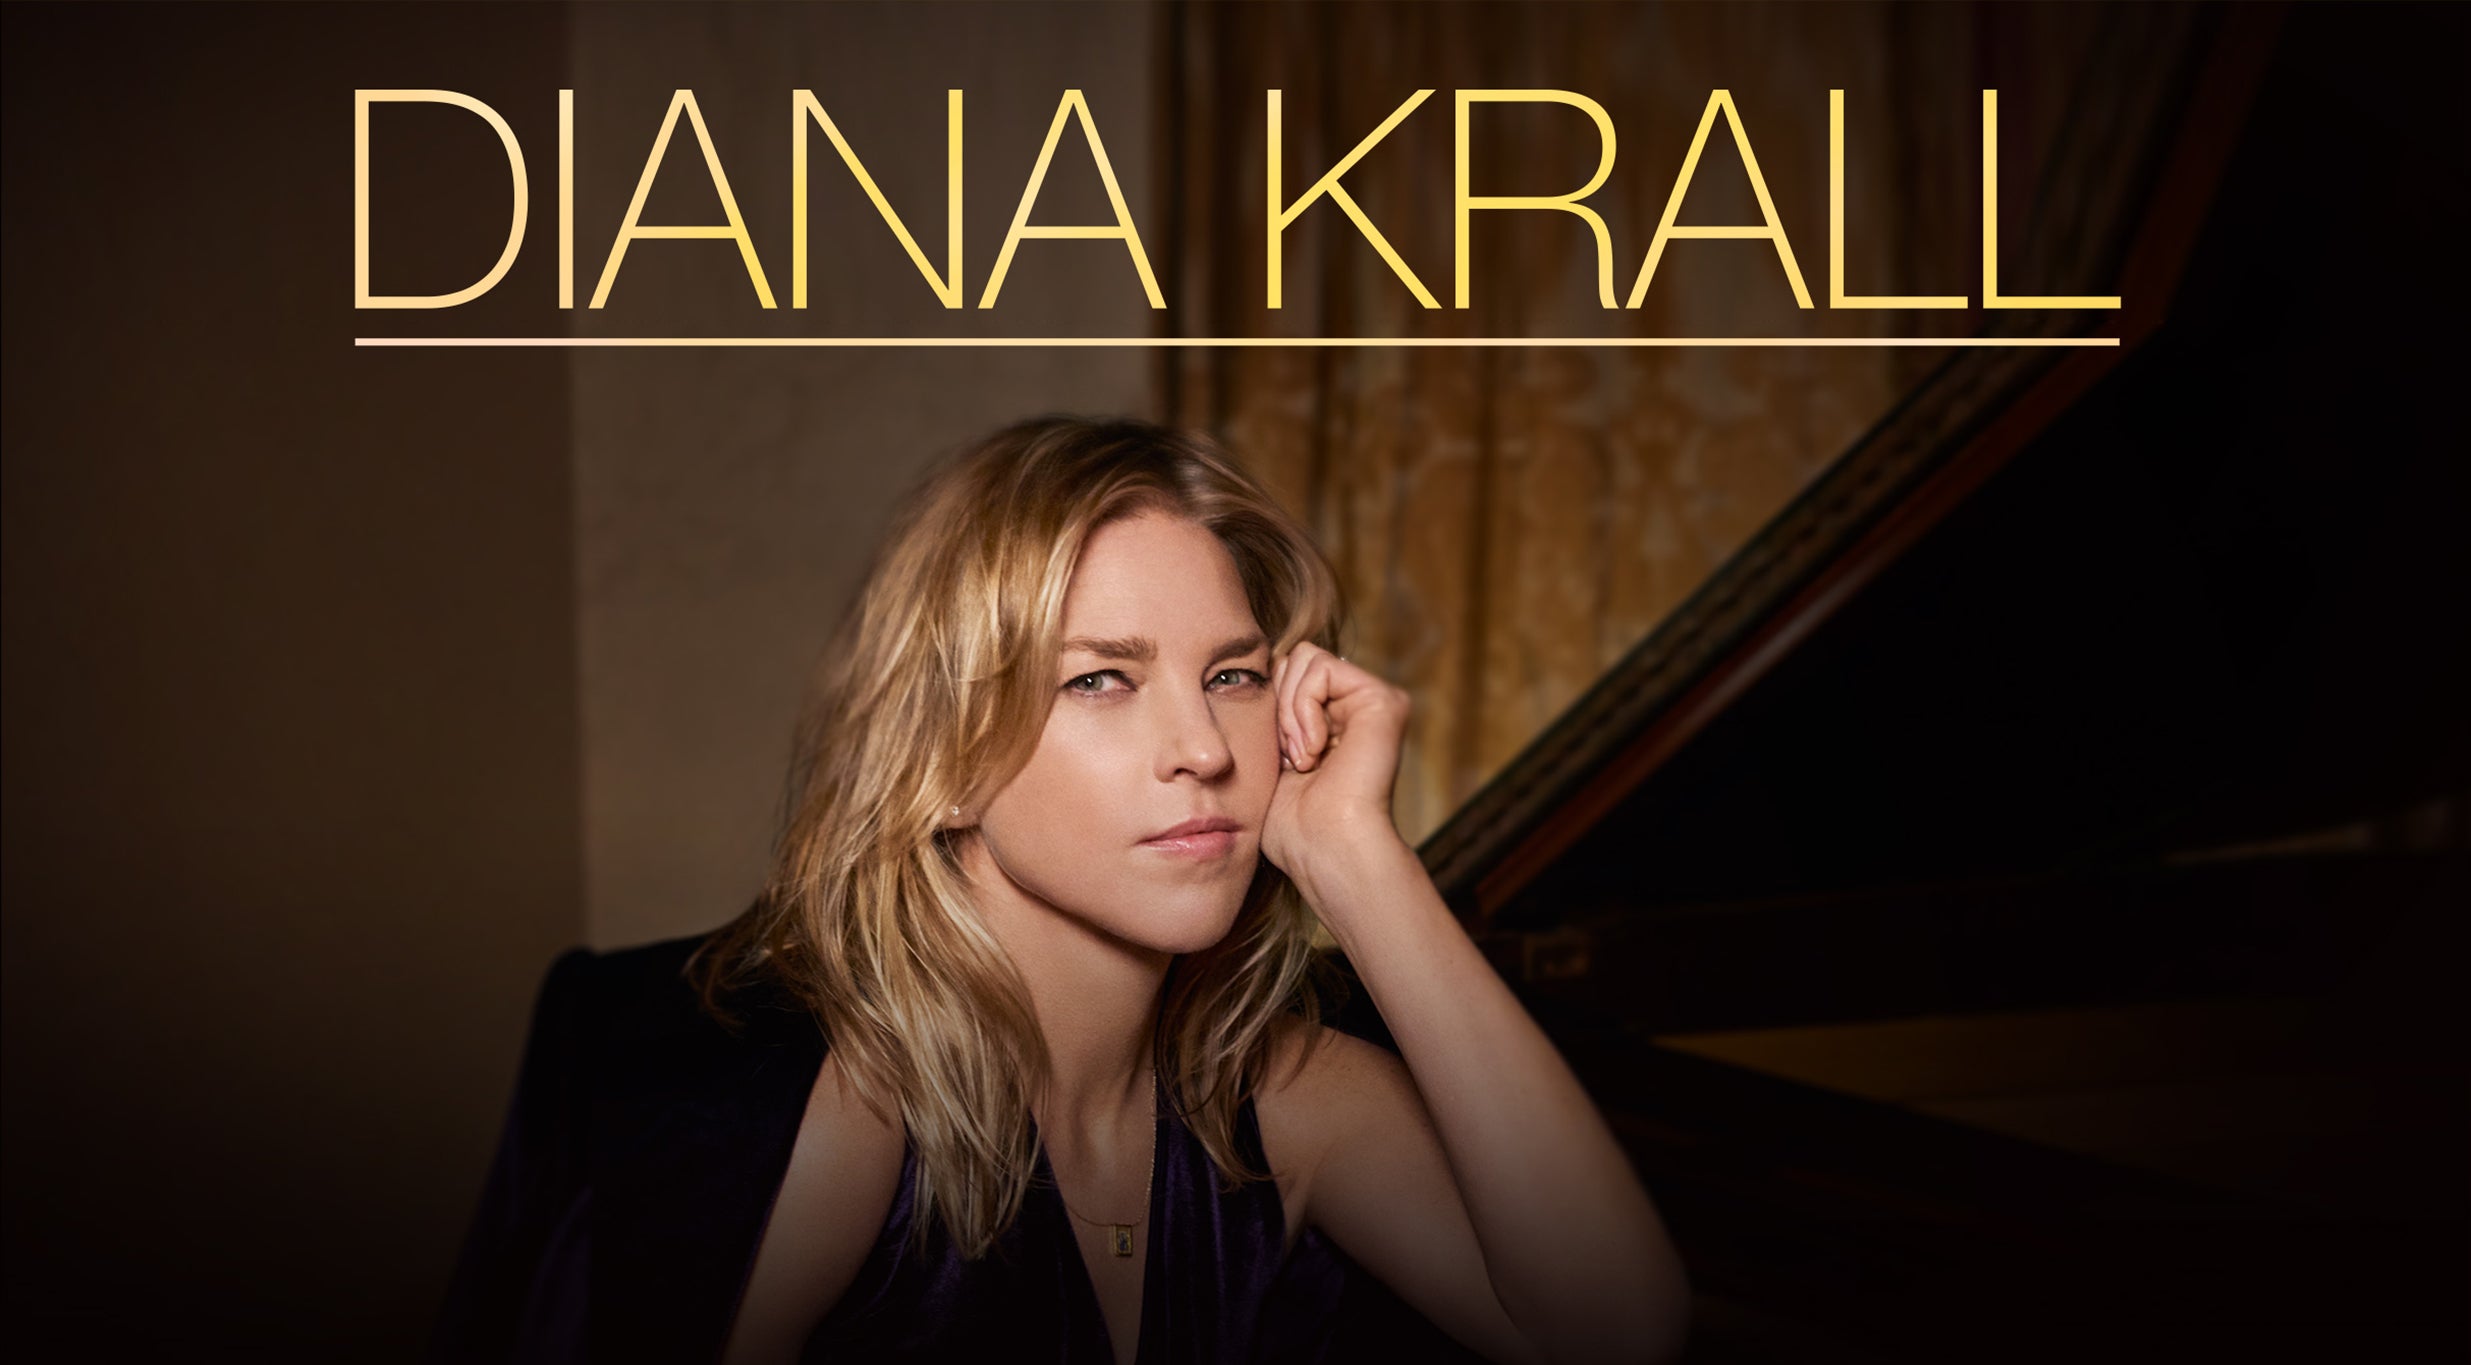 Diana Krall in Mobile promo photo for Official Platinum presale offer code